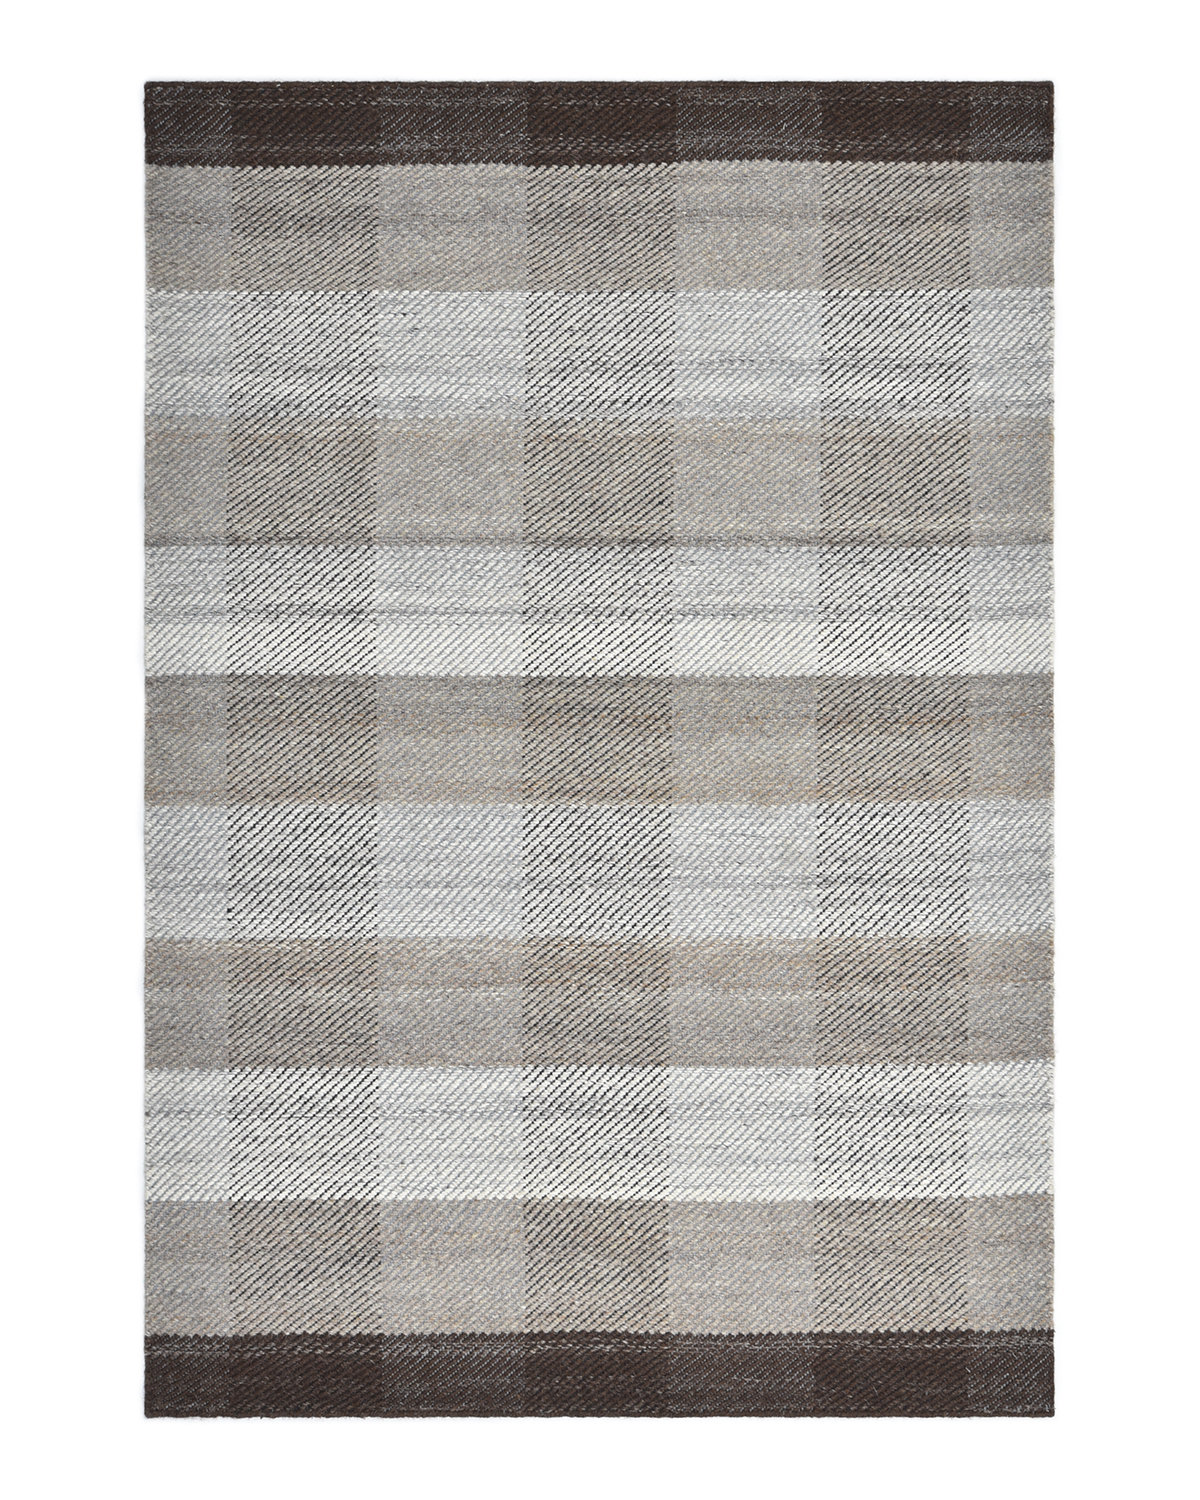 Solo Rugs Carrie Contemporary Hand Woven Handmade Brown Checkered Inddor Kitchen Bedroom Living Room Area Rug Carpet 5 x 8 